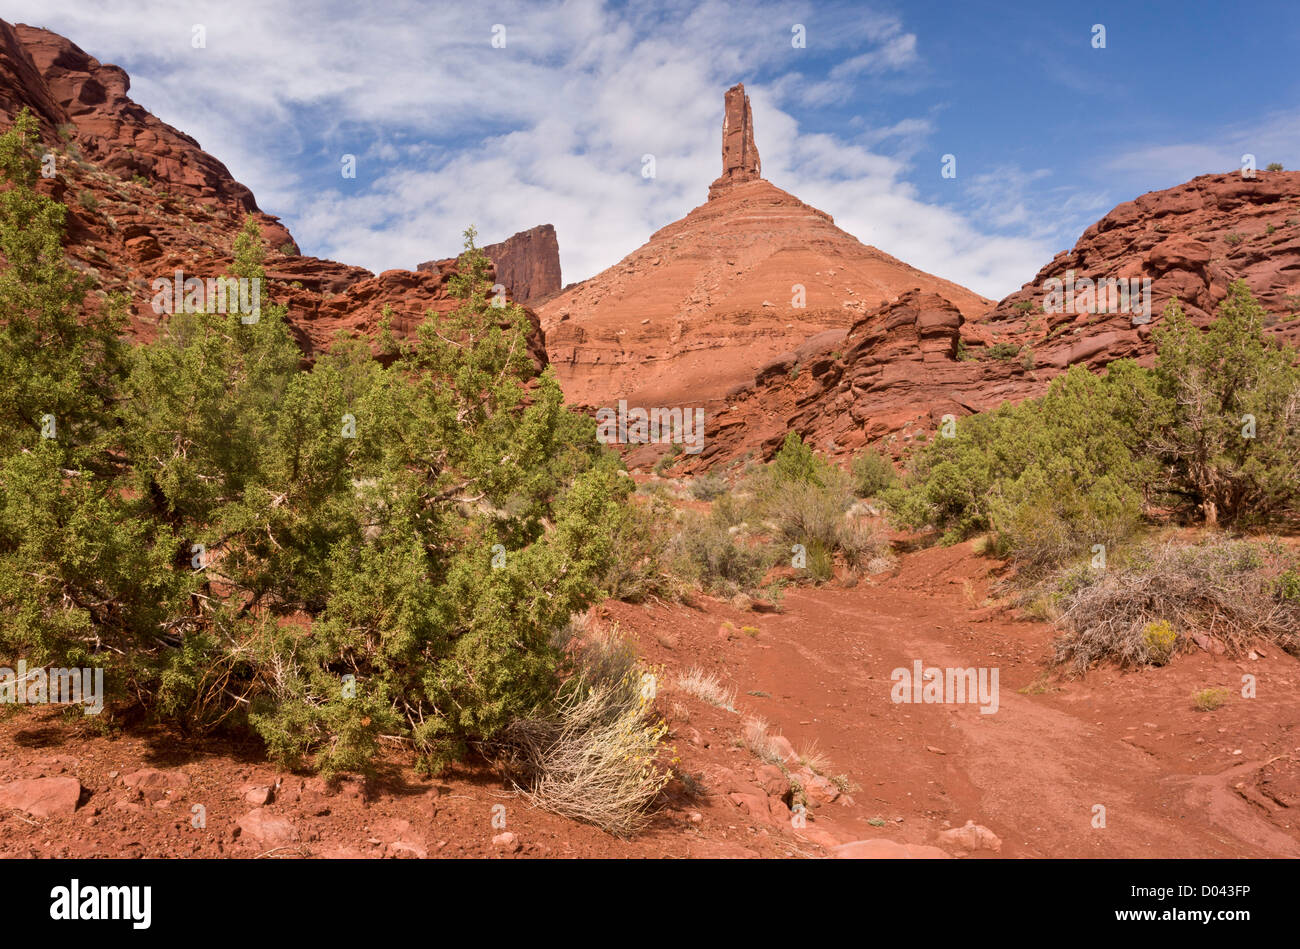 Sandstone pinnacles and cliffs in Castle Valley, near Moab, Utah, USA Stock Photo